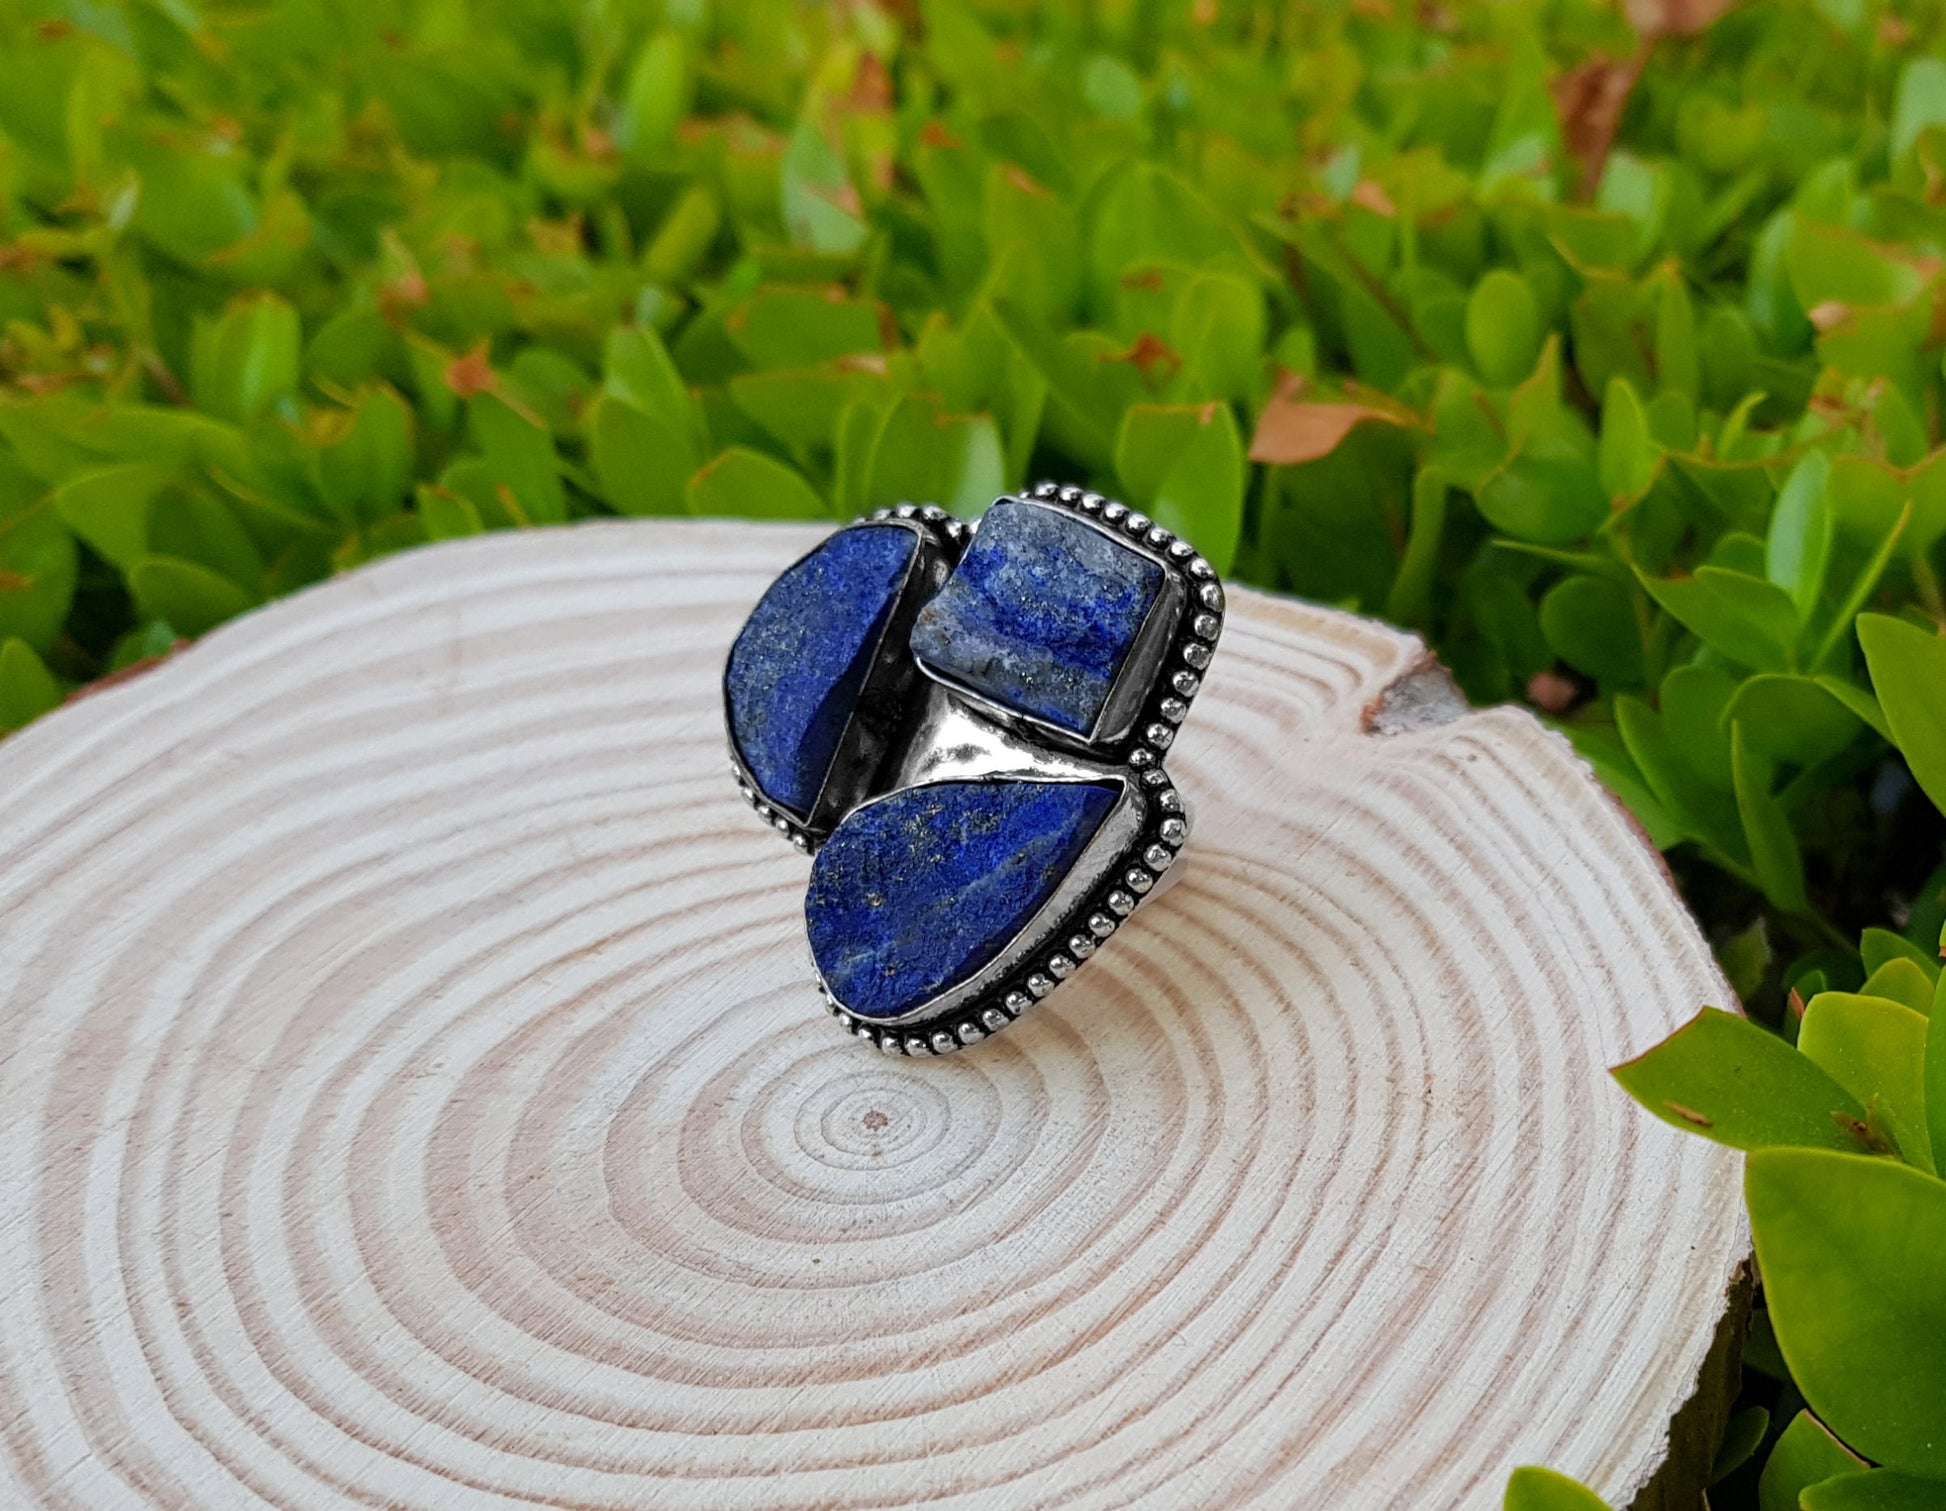 Raw Lapis Lazuli Multi Stone Ring In Sterling Silver Size US 6 Big Statement Ring Boho Crystal Rings GypsyJewelry Unique Gift For Women